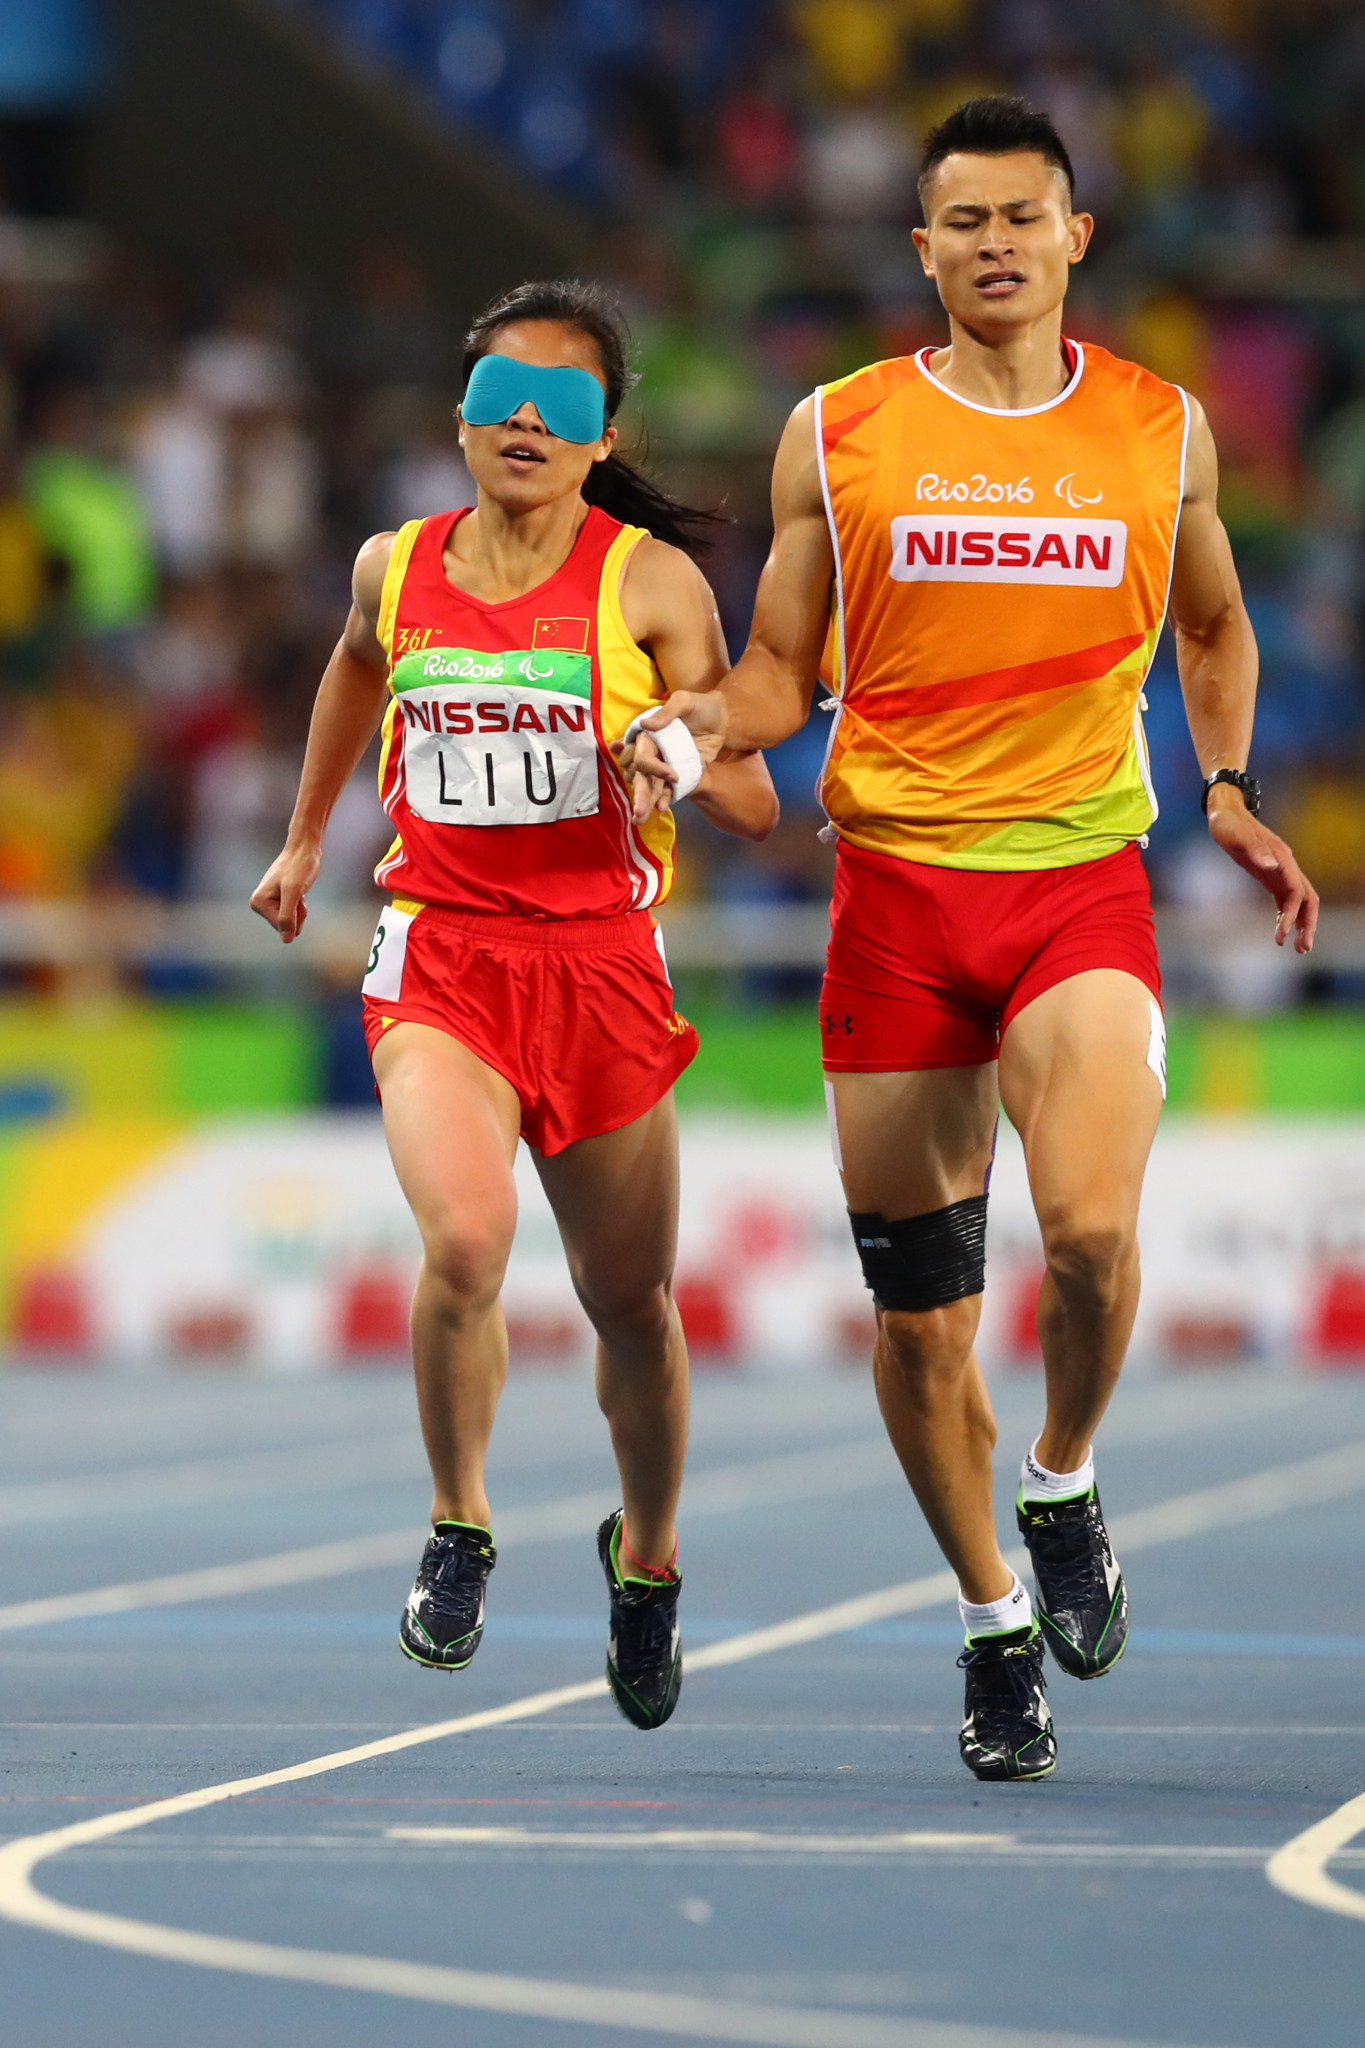 Cuiqing Liu, pictured with her guide, earned a second win over fellow Chinese world champion Zhou Guohua, this time over 100m, at the World Para Athletics Grand Prix in Beijing ©Getty Images